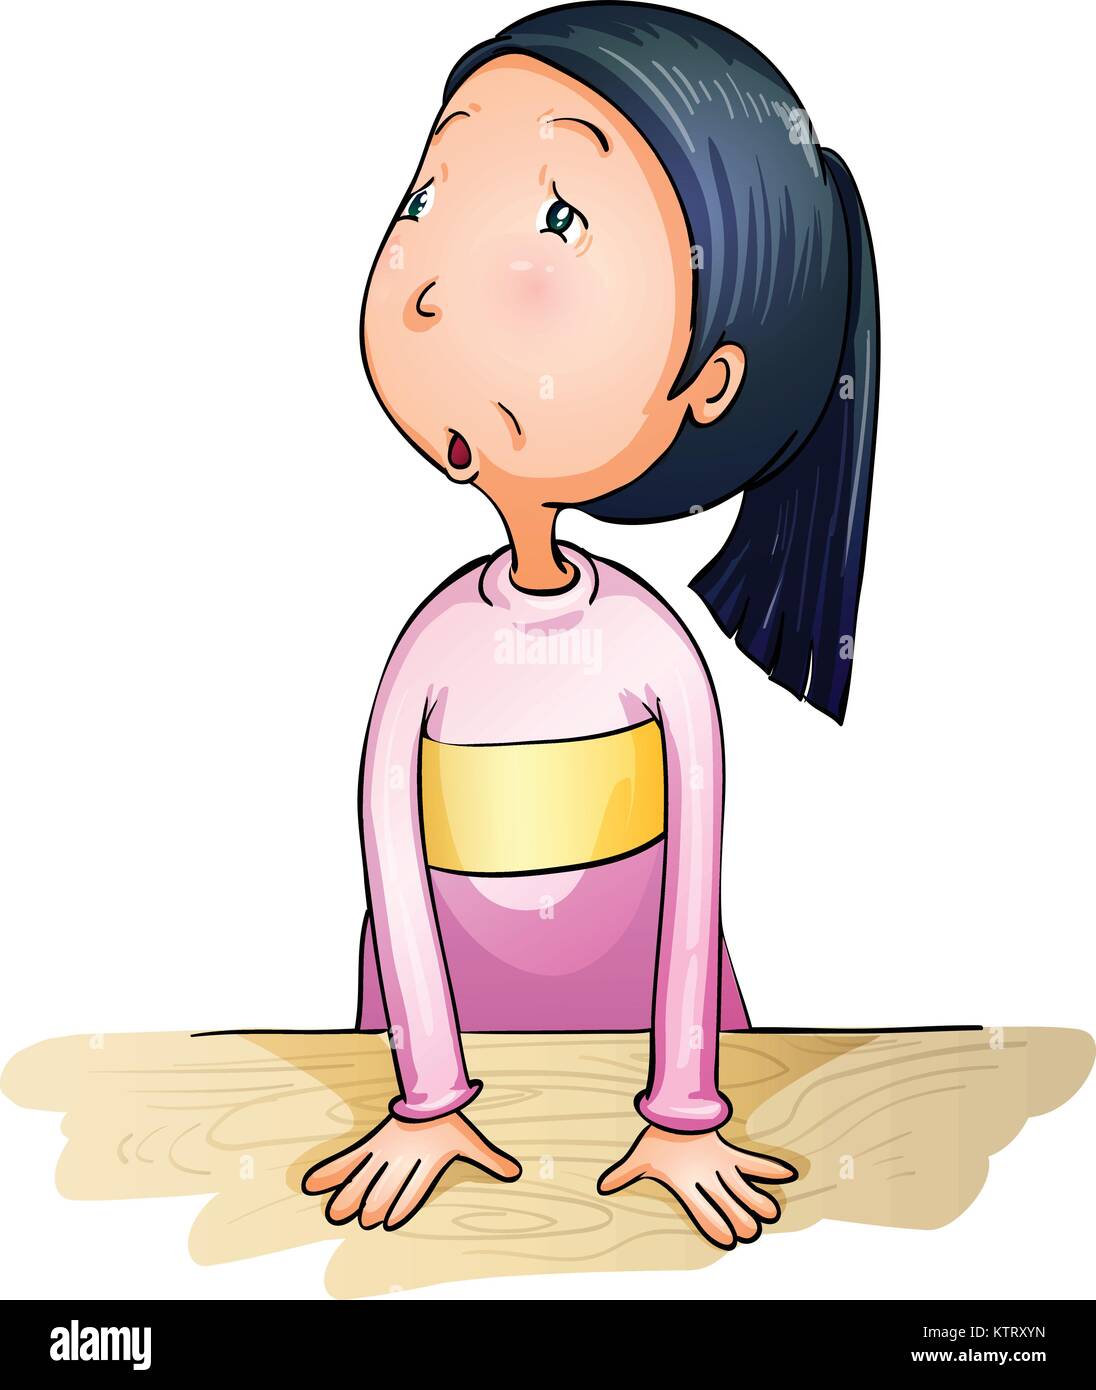 Illustration of worried and confused girl Stock Vector